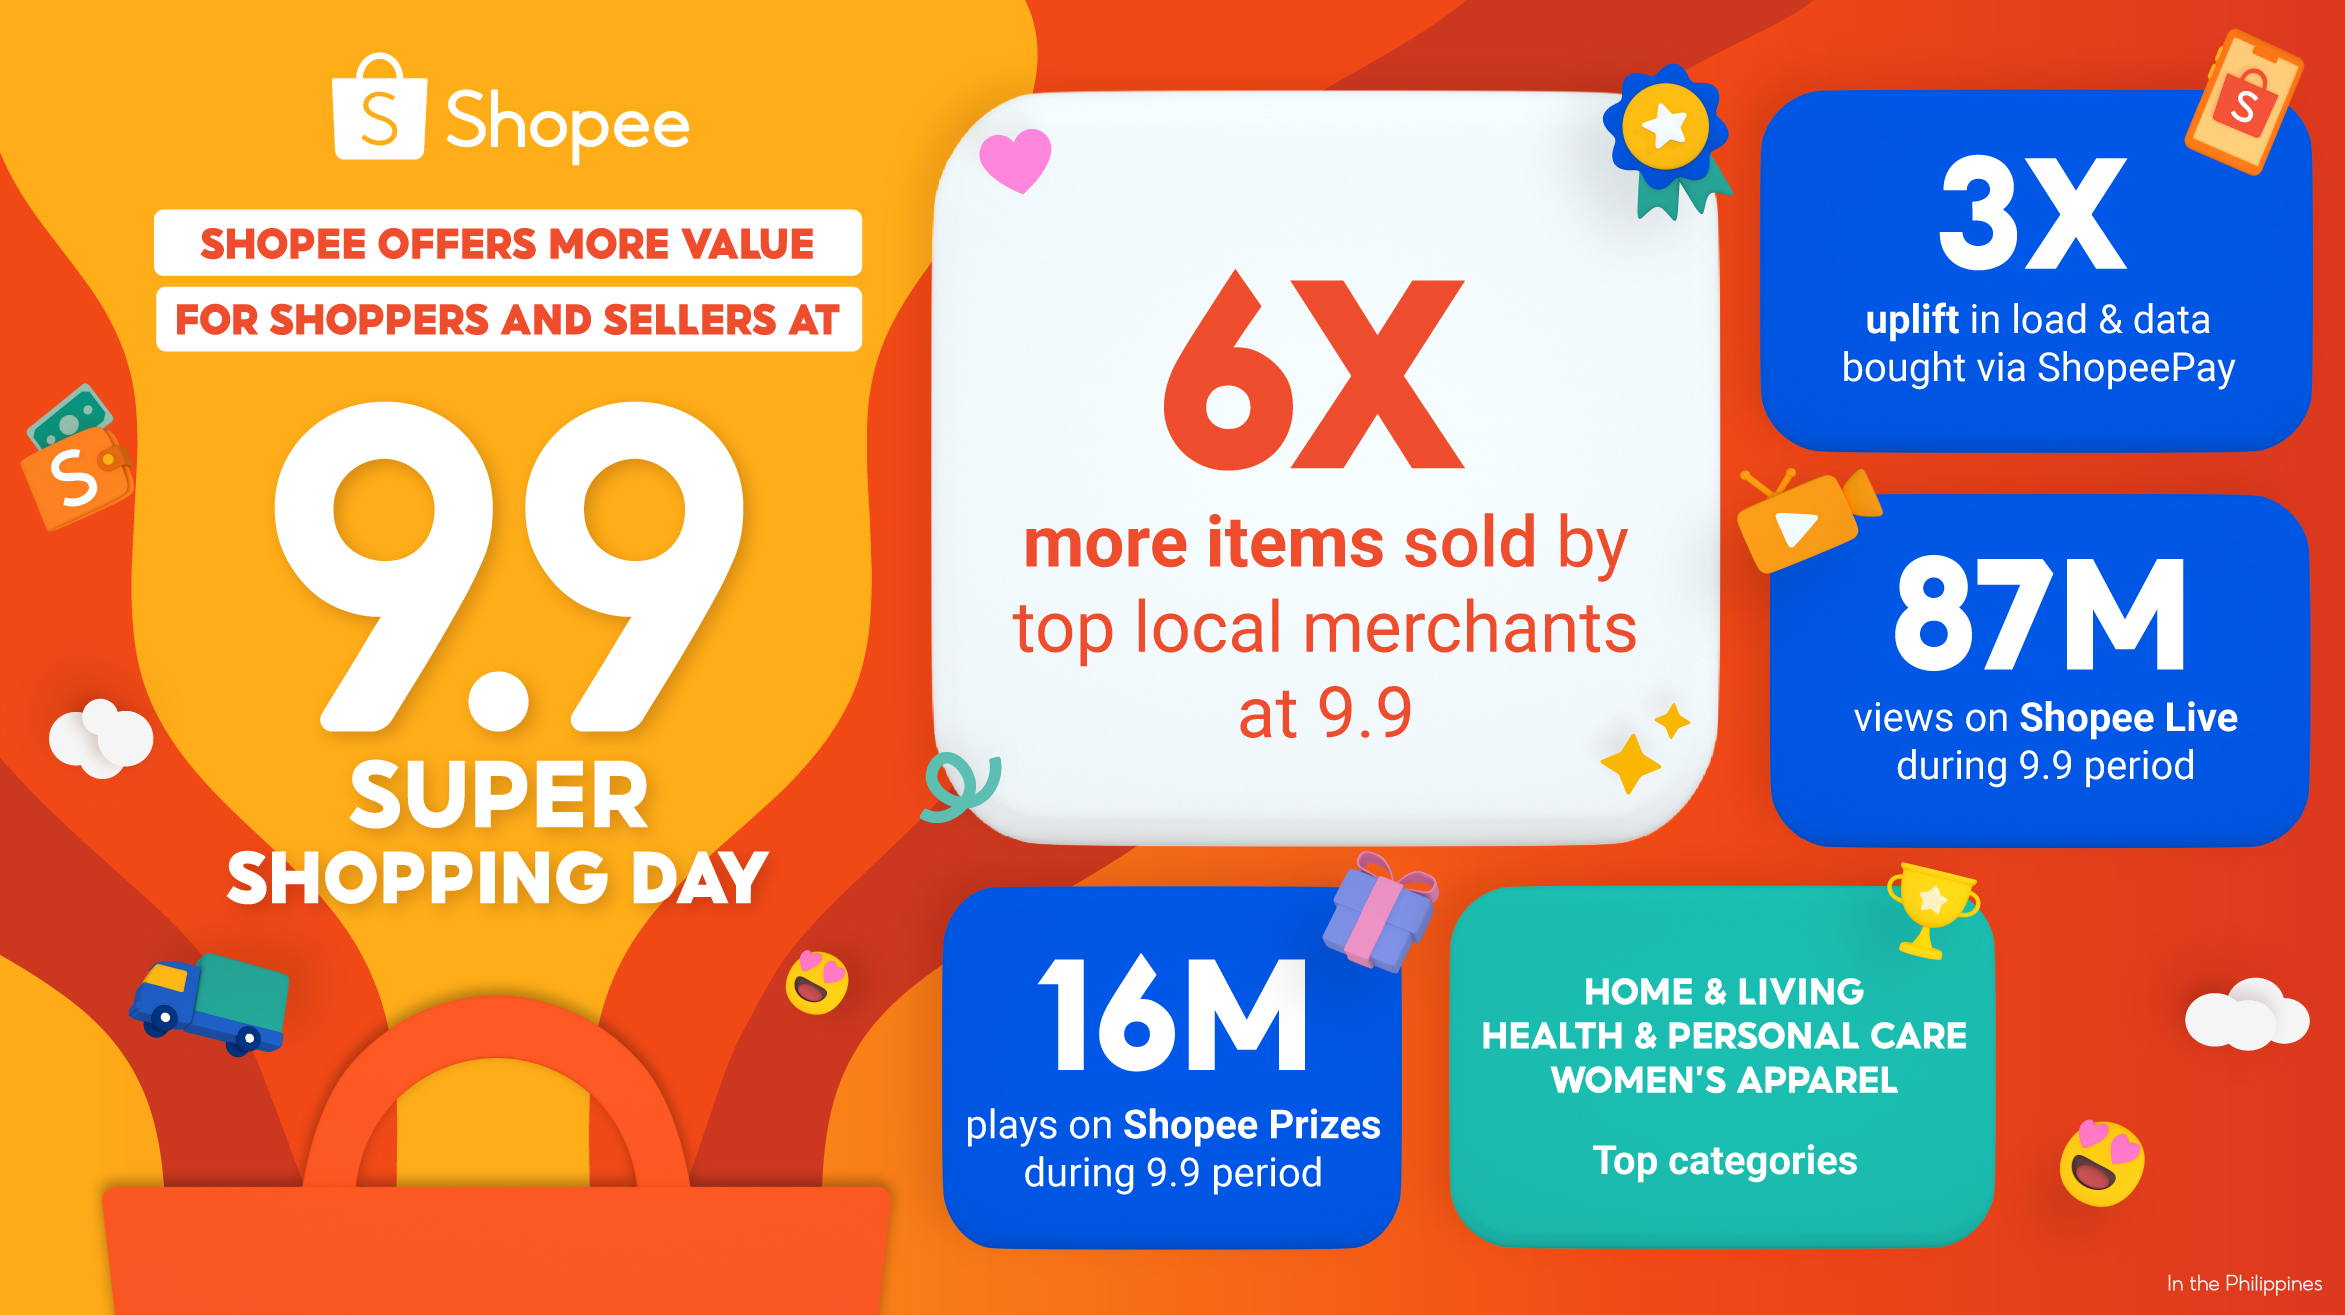 Top local merchants sell 6x more items at Shopee's 9.9 Super Shopping Day!